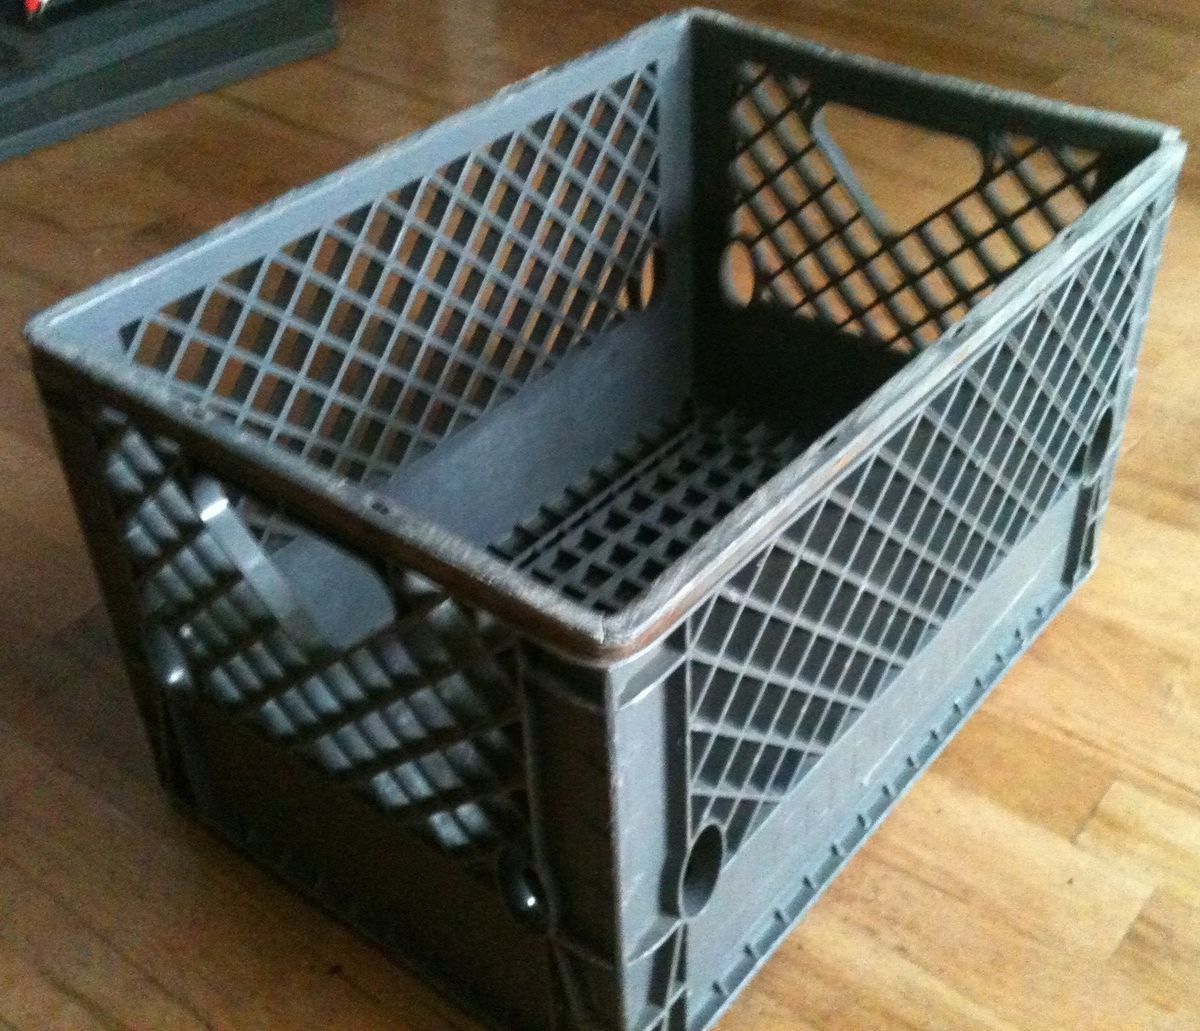 Large Milk Crate Dairy Crates Plastic Storage Container Stackable Bins